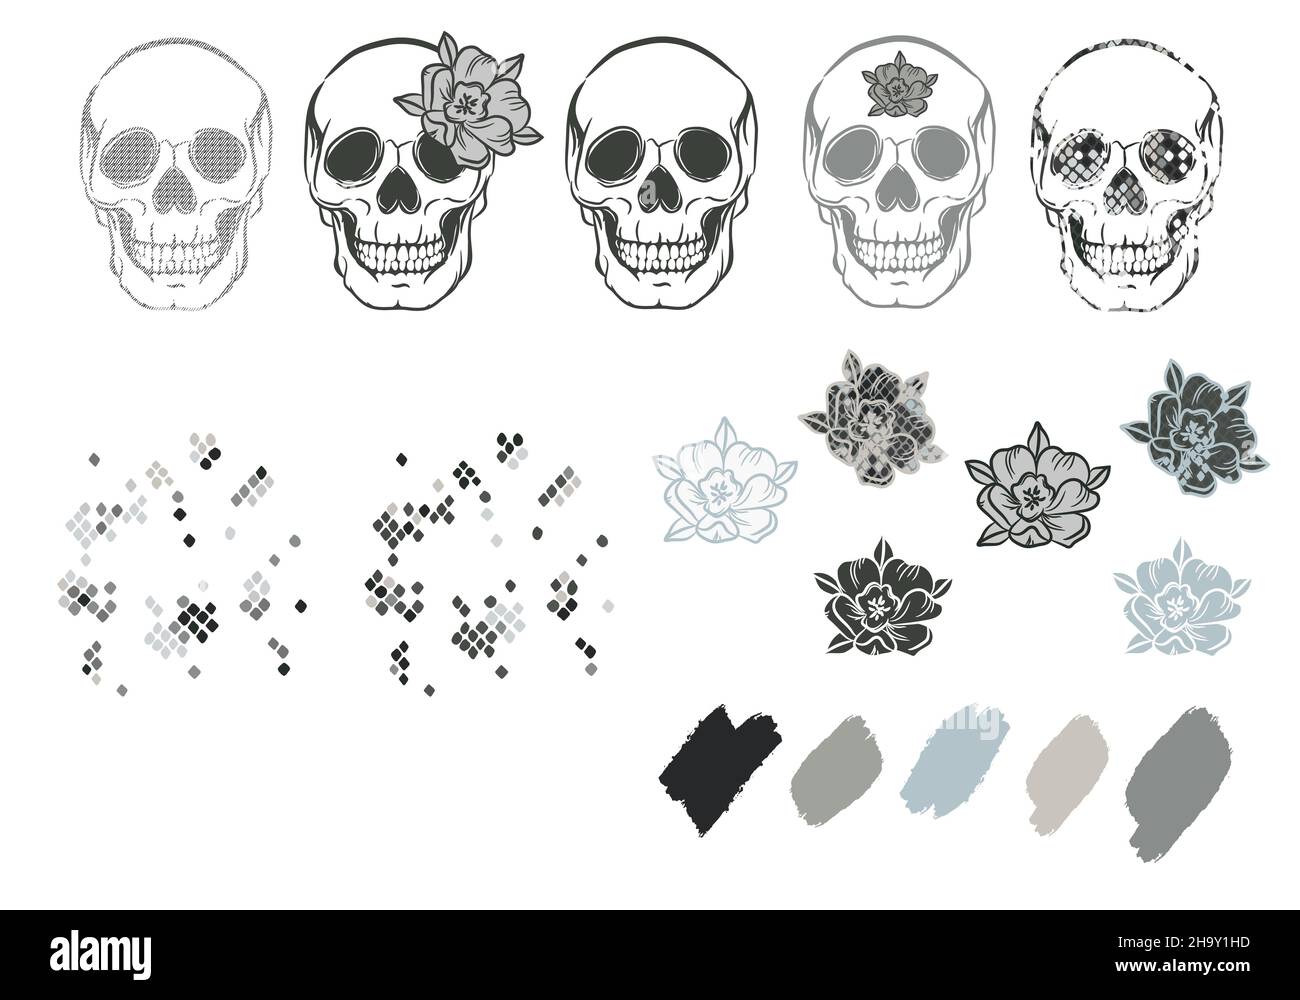 Skulls with flowers and snake skin texture. Floral boho and grunge designs for tshirt print. Stock Vector